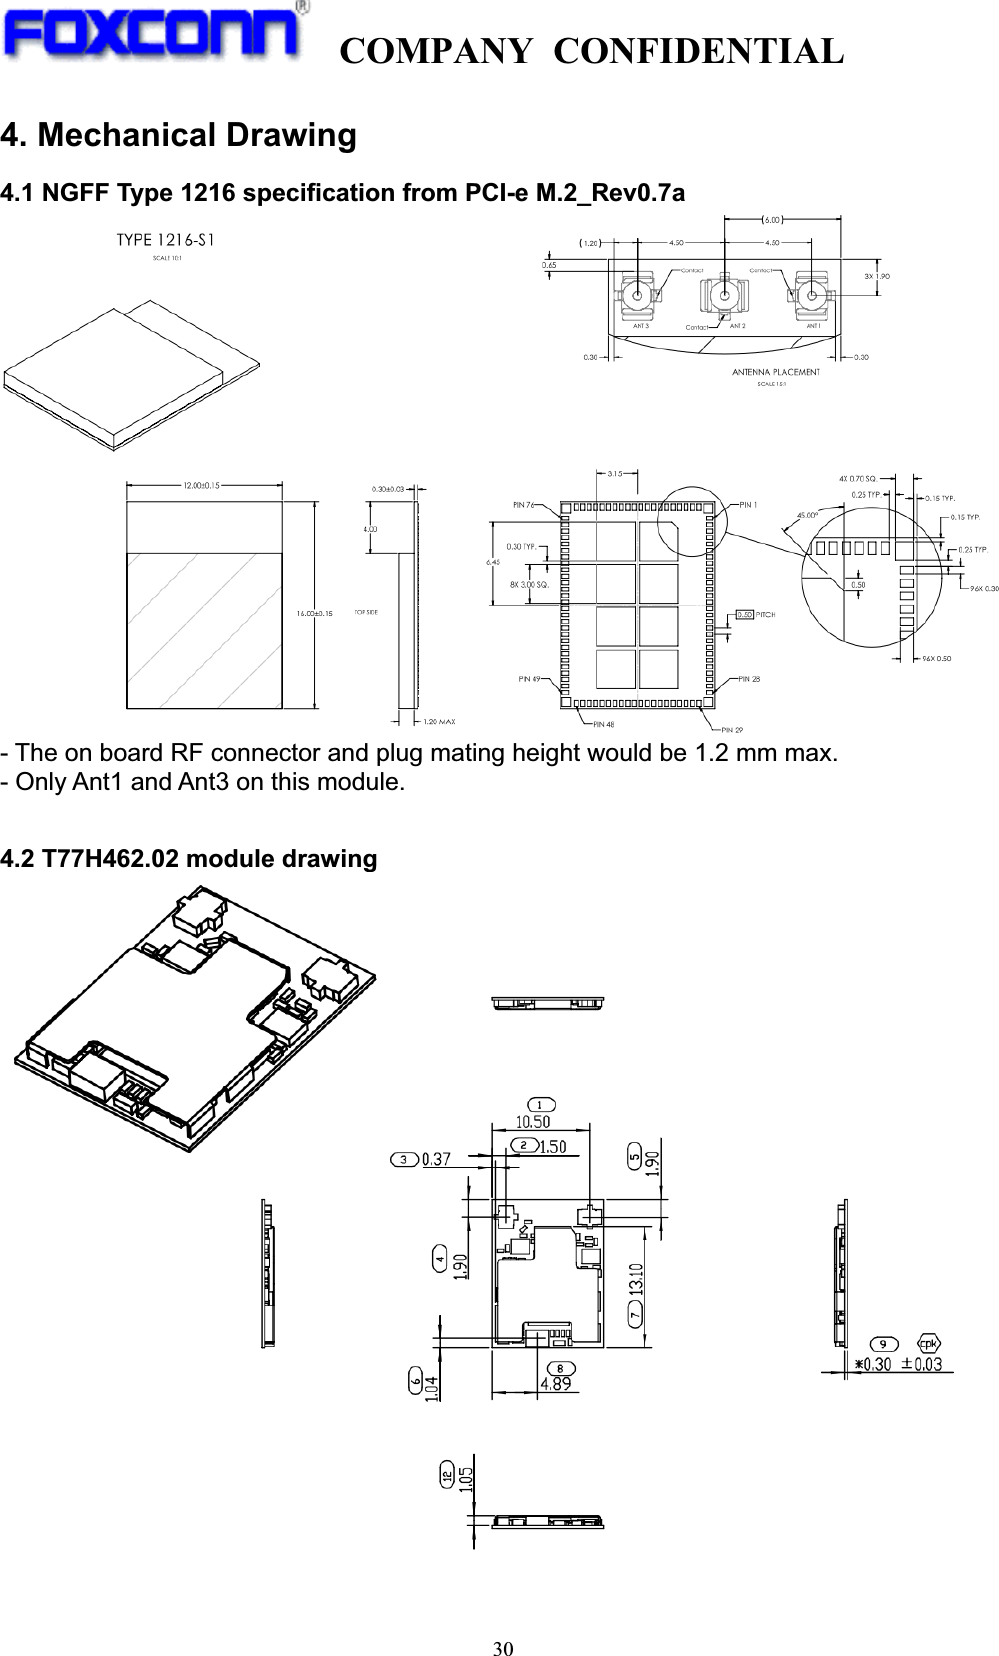 COMPANY CONFIDENTIAL30 !4. Mechanical Drawing 4.1 NGFF Type 1216 specification from PCI-e M.2_Rev0.7a - The on board RF connector and plug mating height would be 1.2 mm max. - Only Ant1 and Ant3 on this module.   4.2 T77H462.02 module drawing   